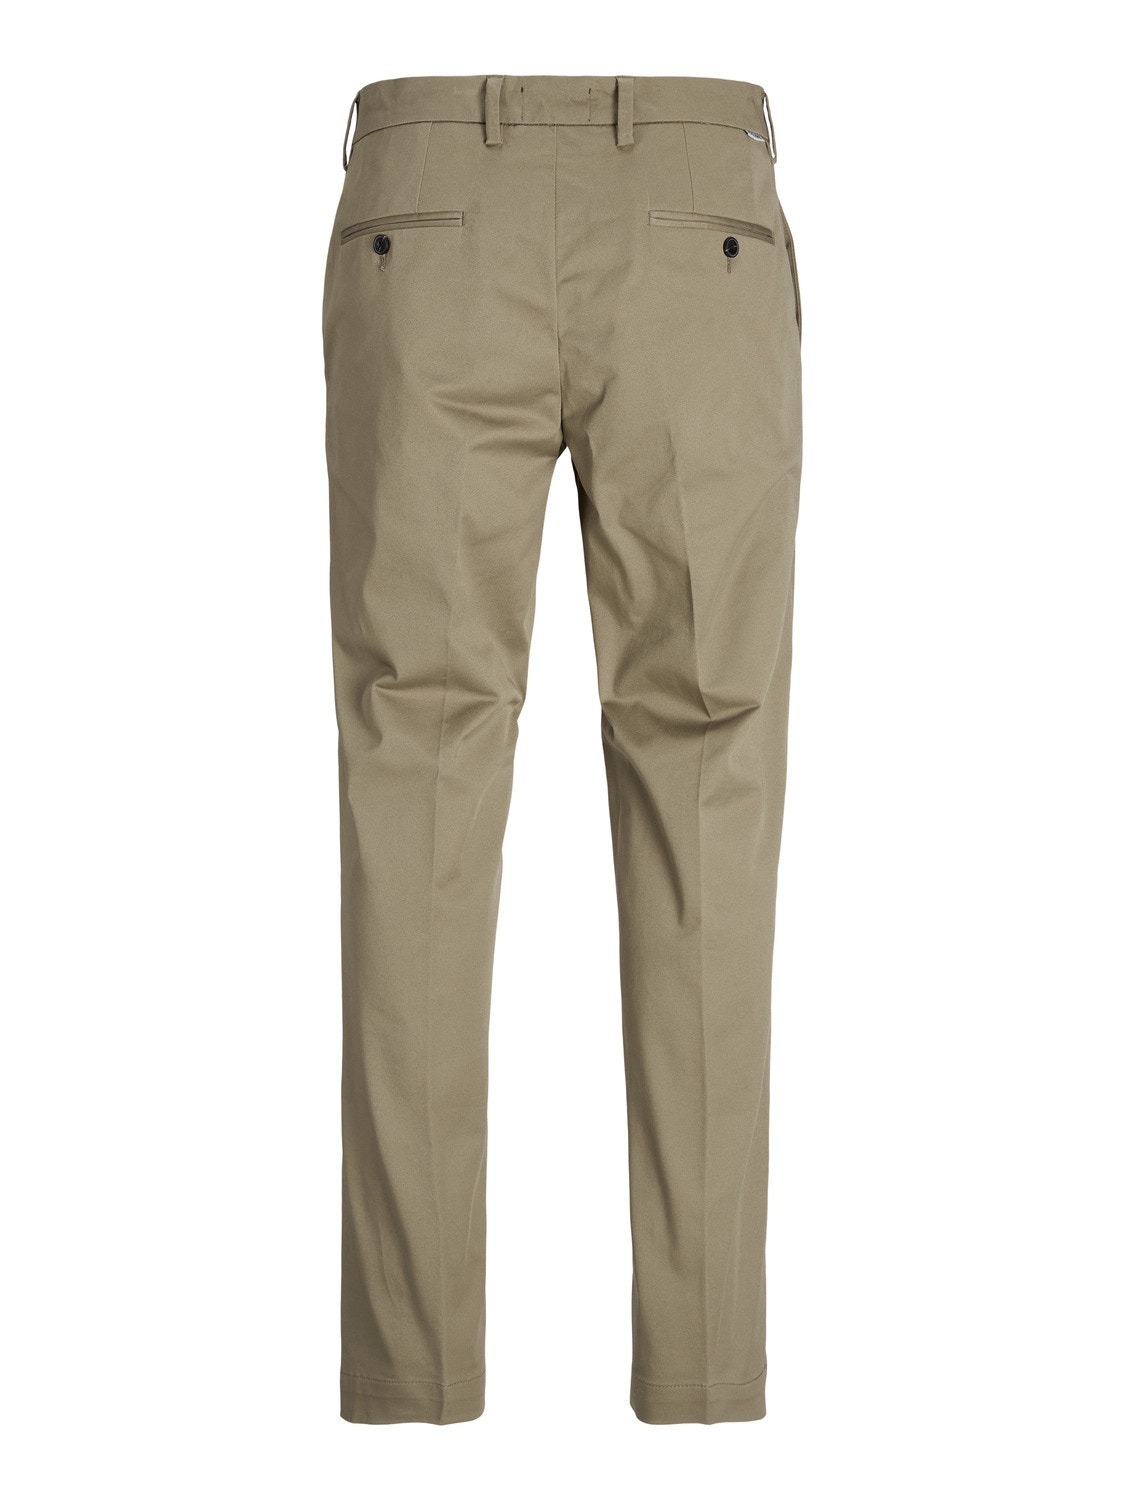 Jack & Jones Relaxed Fit Chino trousers -Elmwood - 12253083